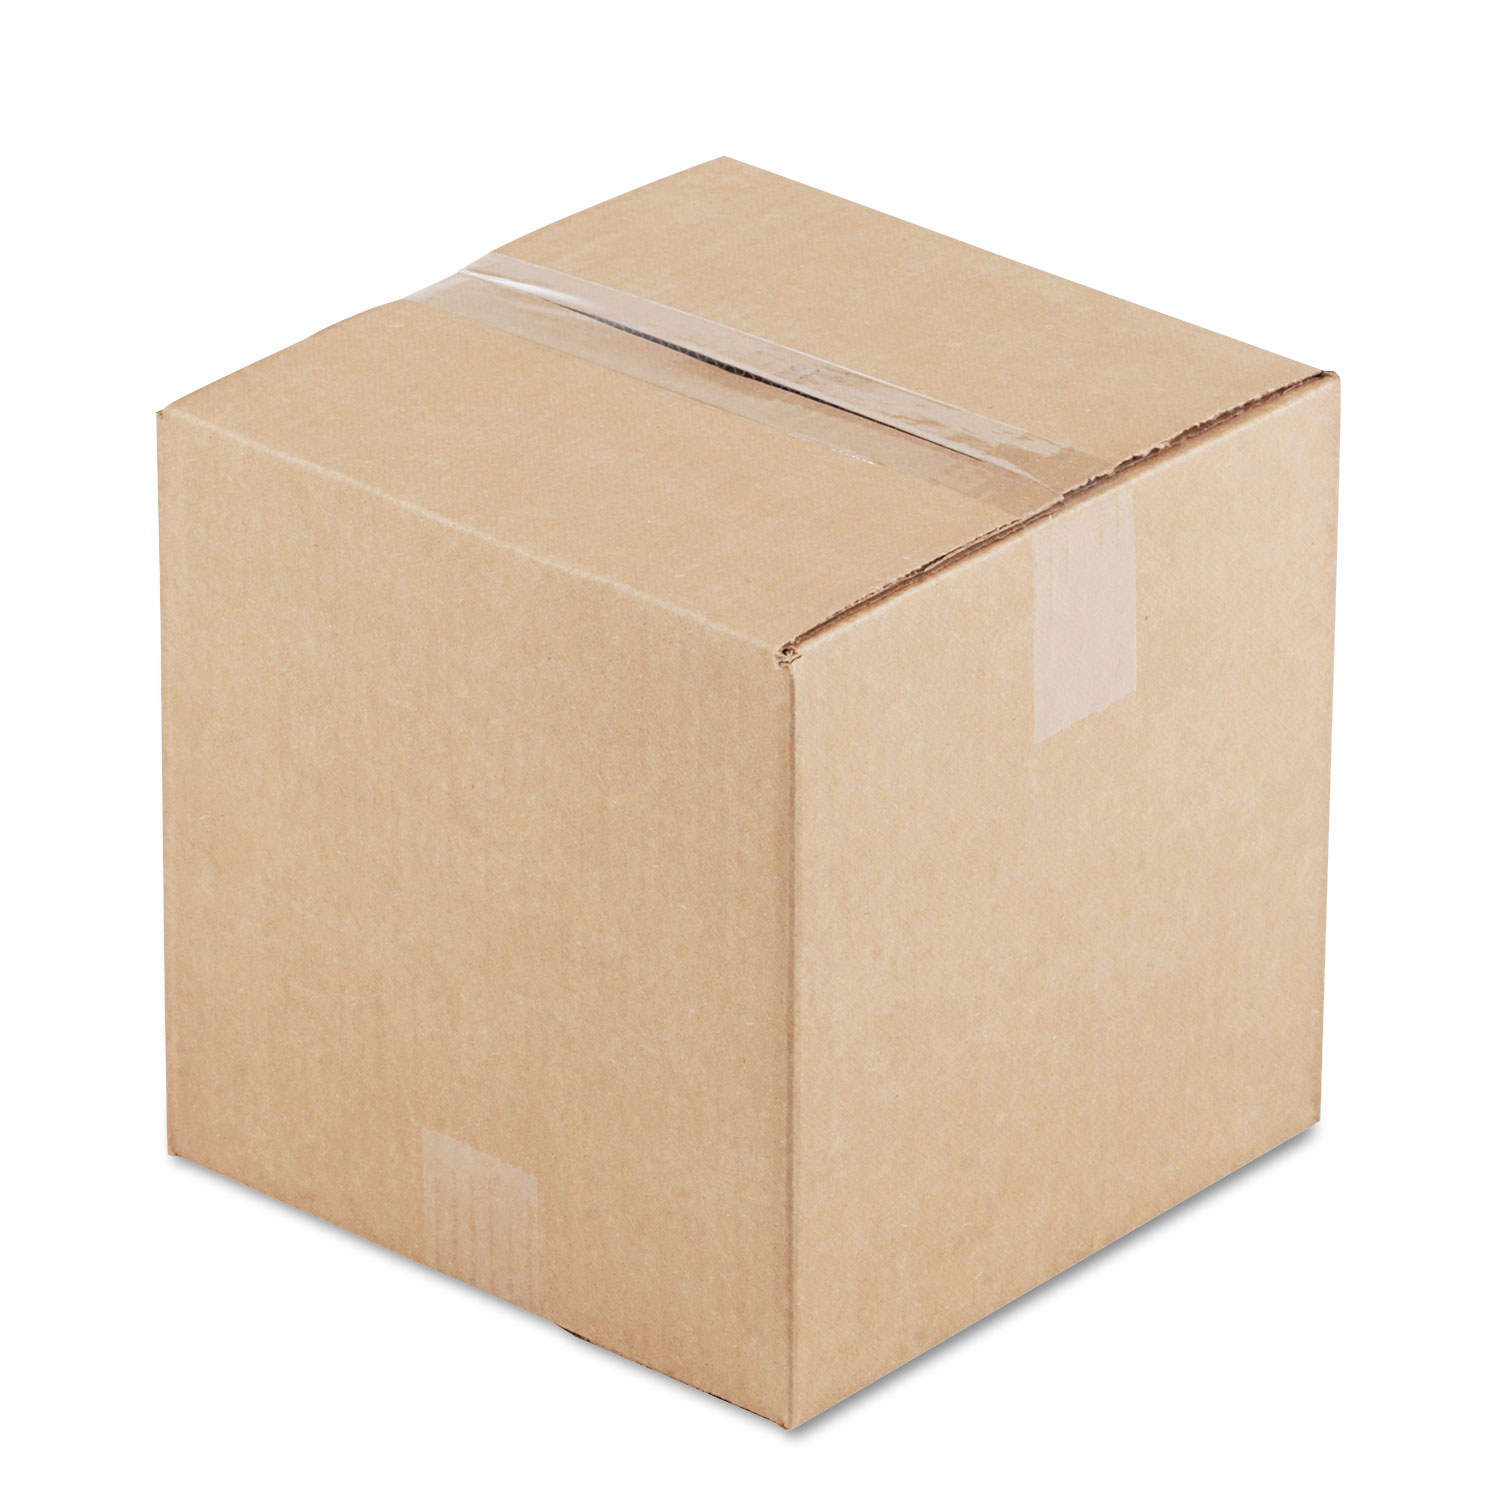 Cubed Fixed-Depth Shipping Boxes, Regular Slotted Container (RSC), 10